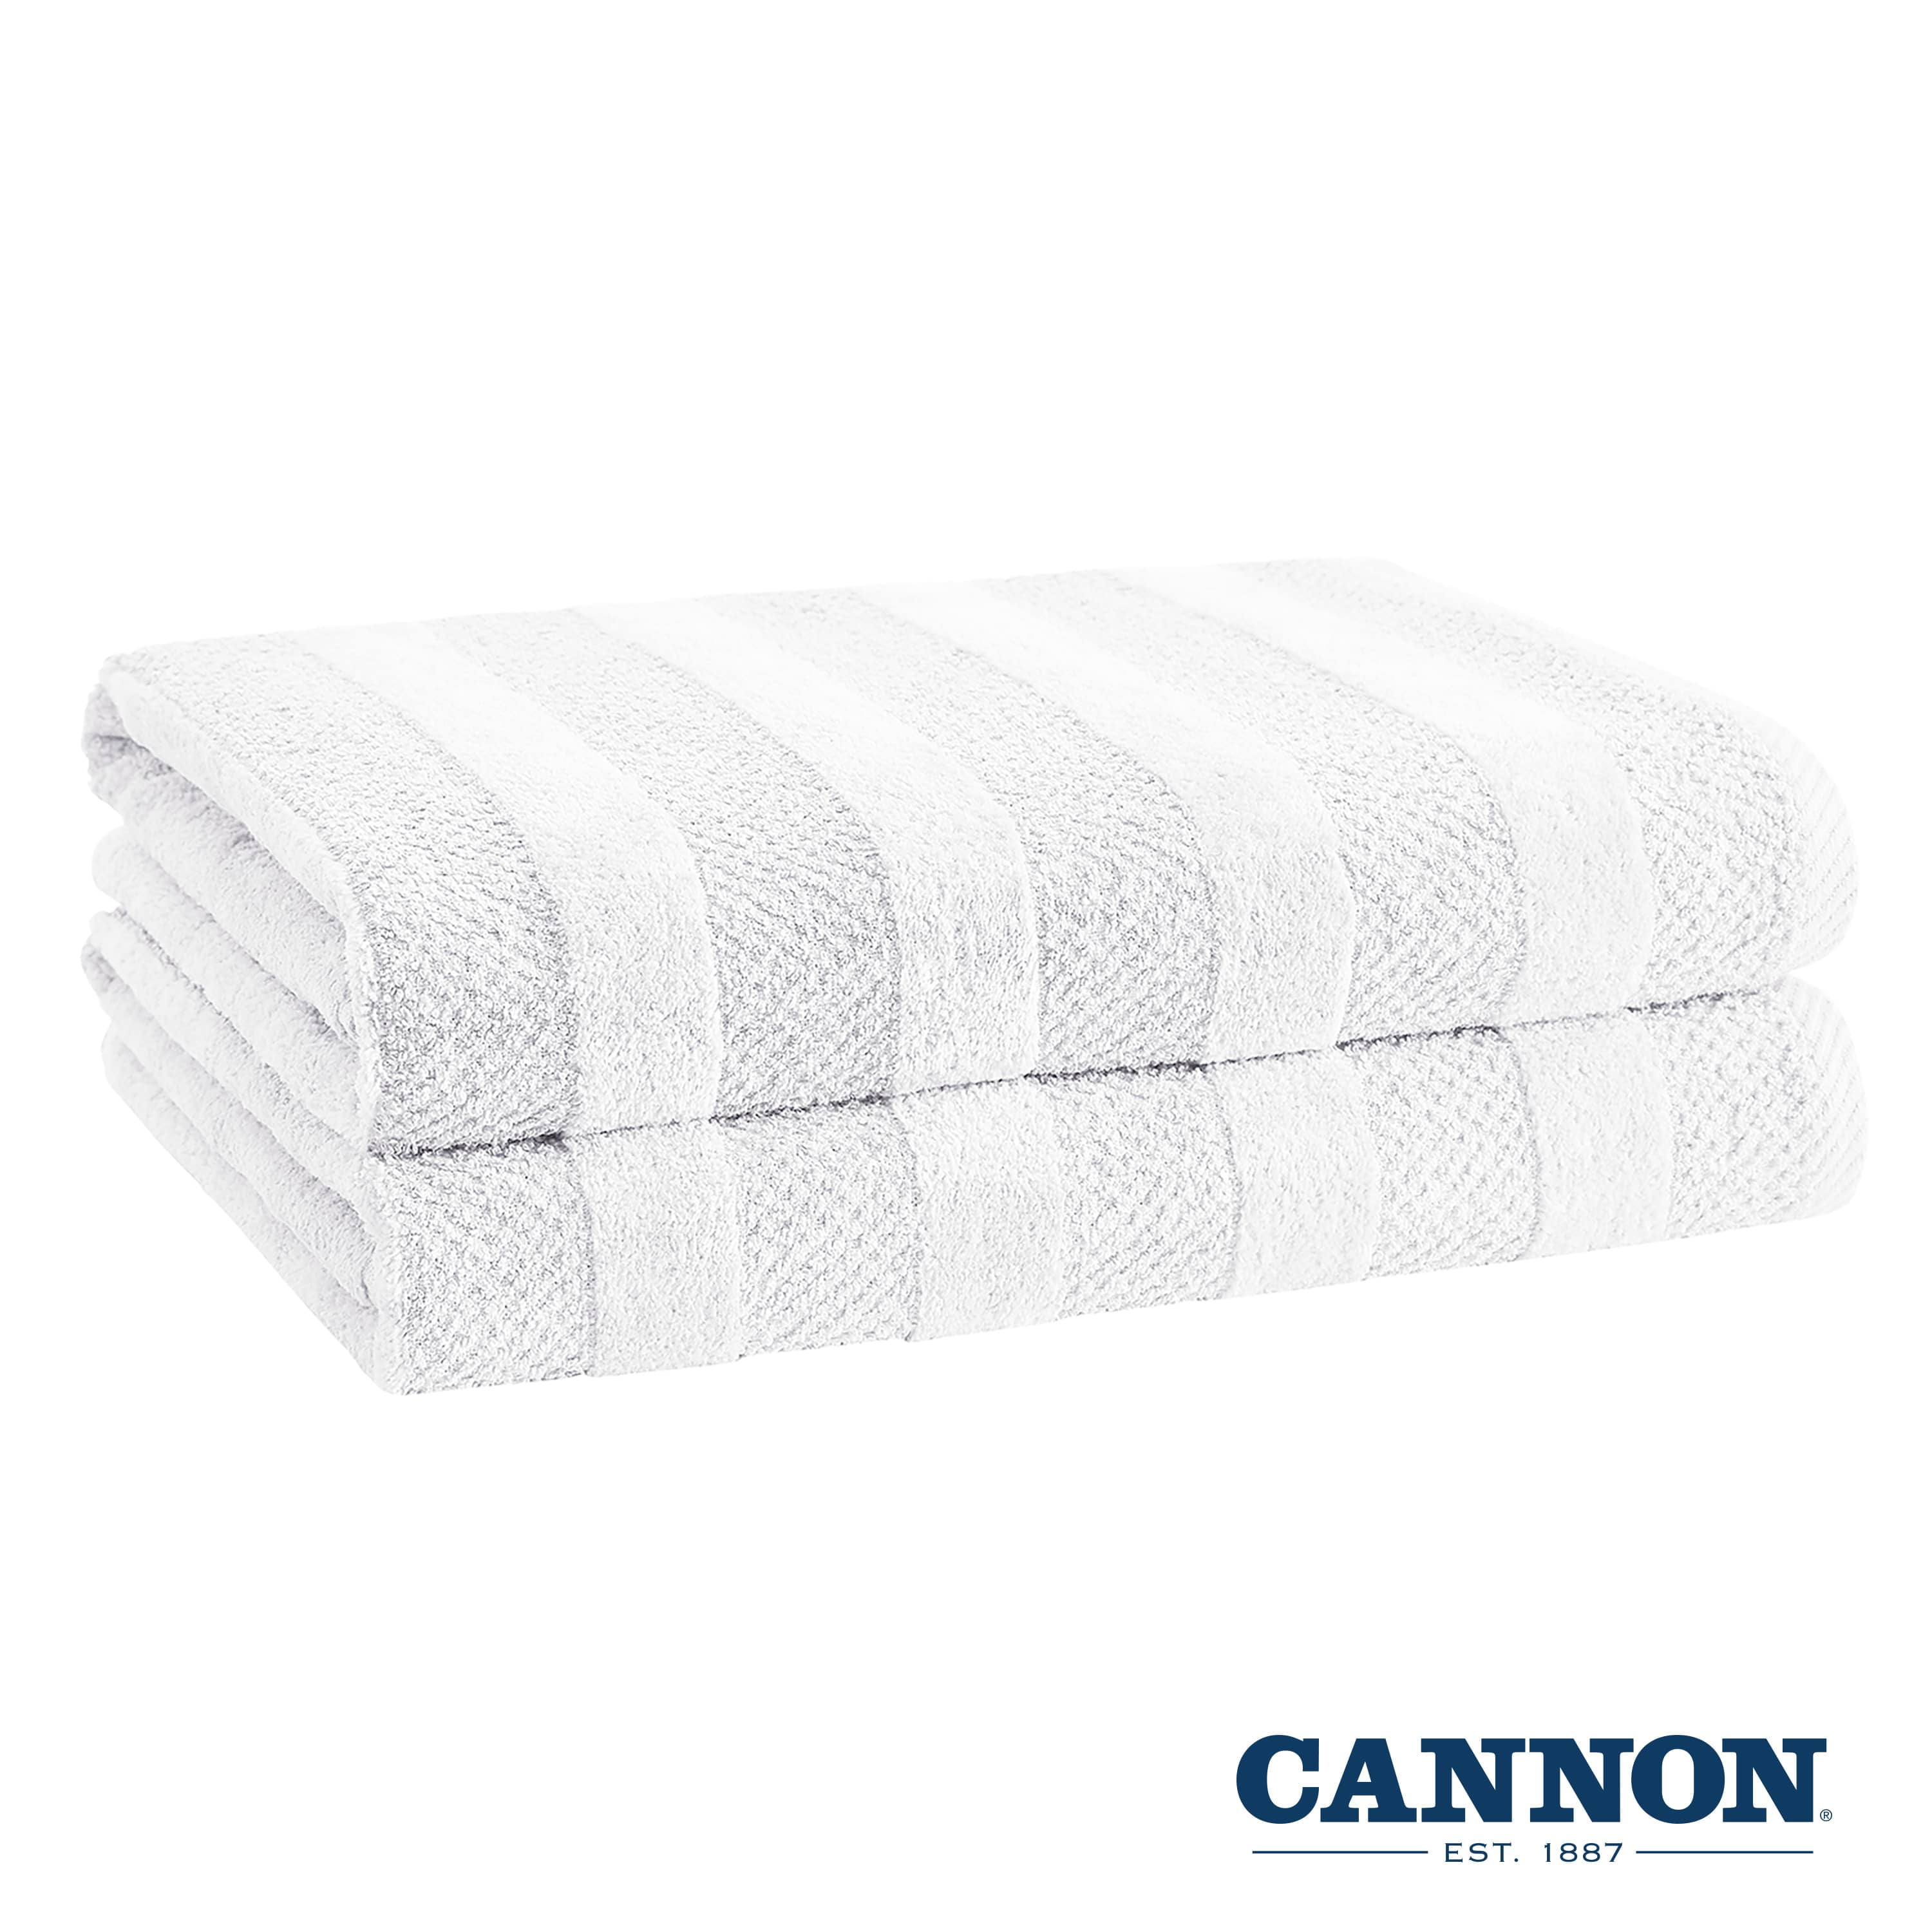 Cannon Shear Bliss Lightweight Quick Dry Cotton 2 Pack Bath Towels